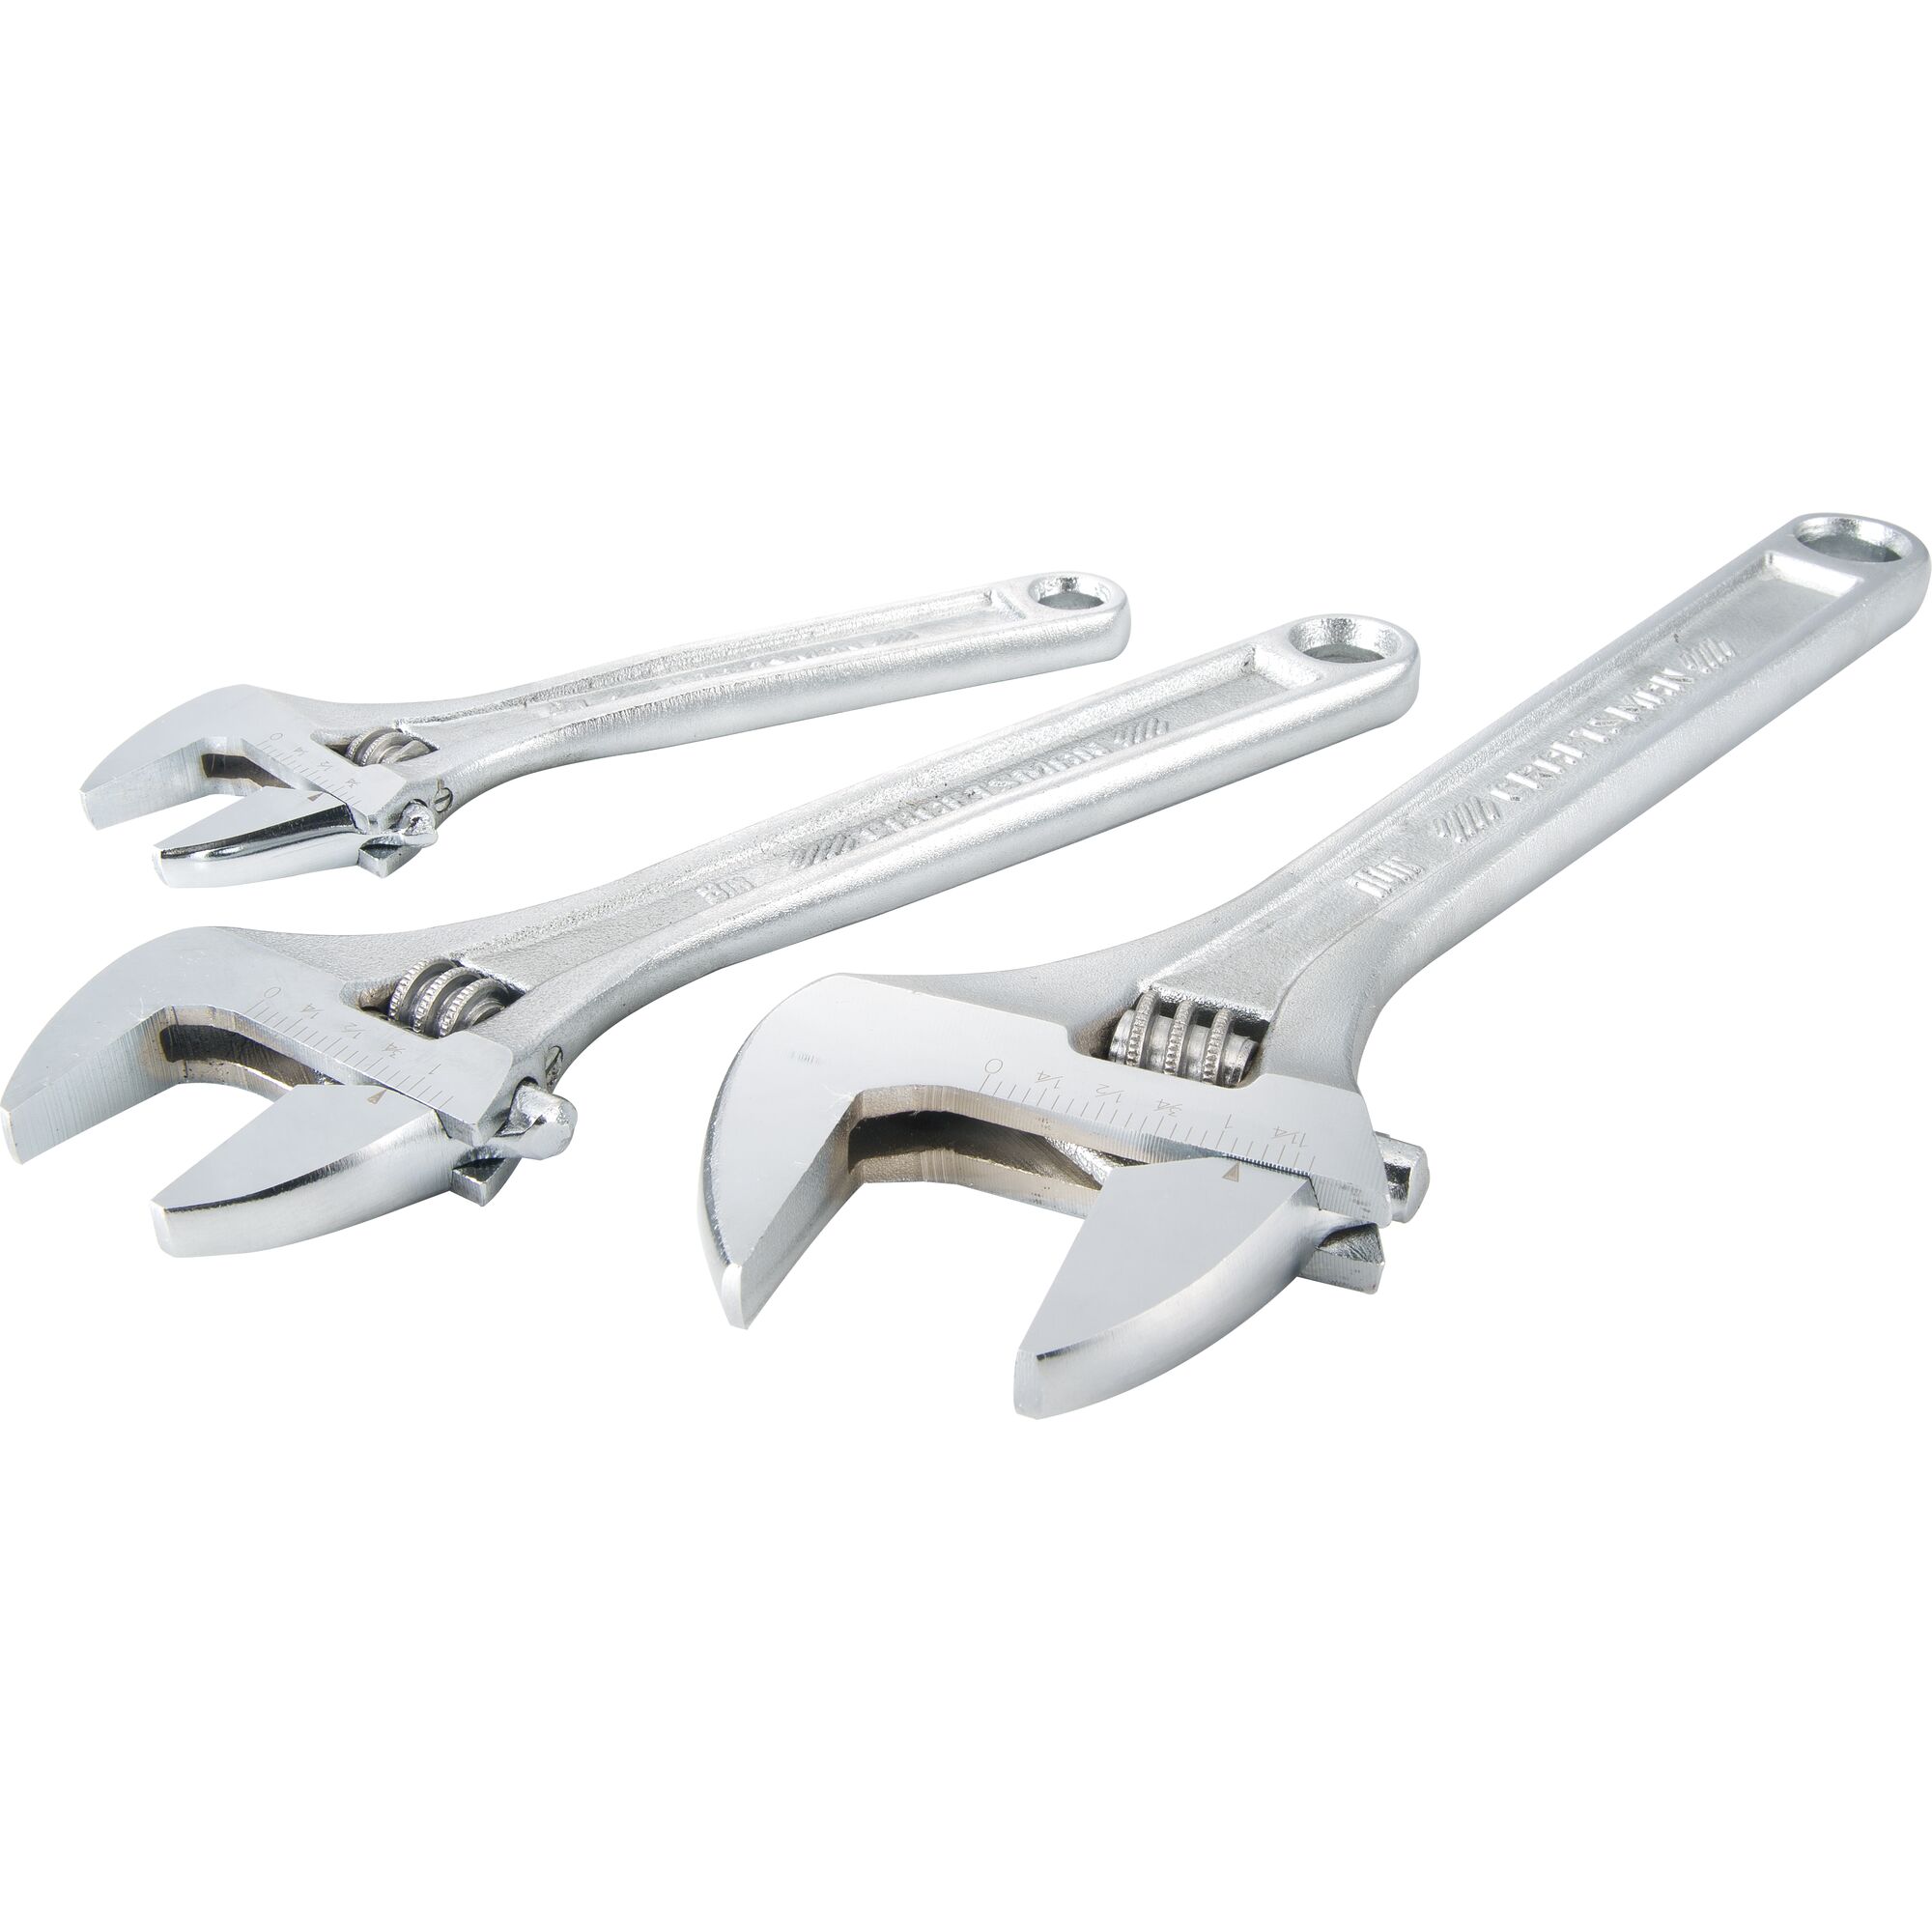 View of CRAFTSMAN Wrenches: Adjustable on white background